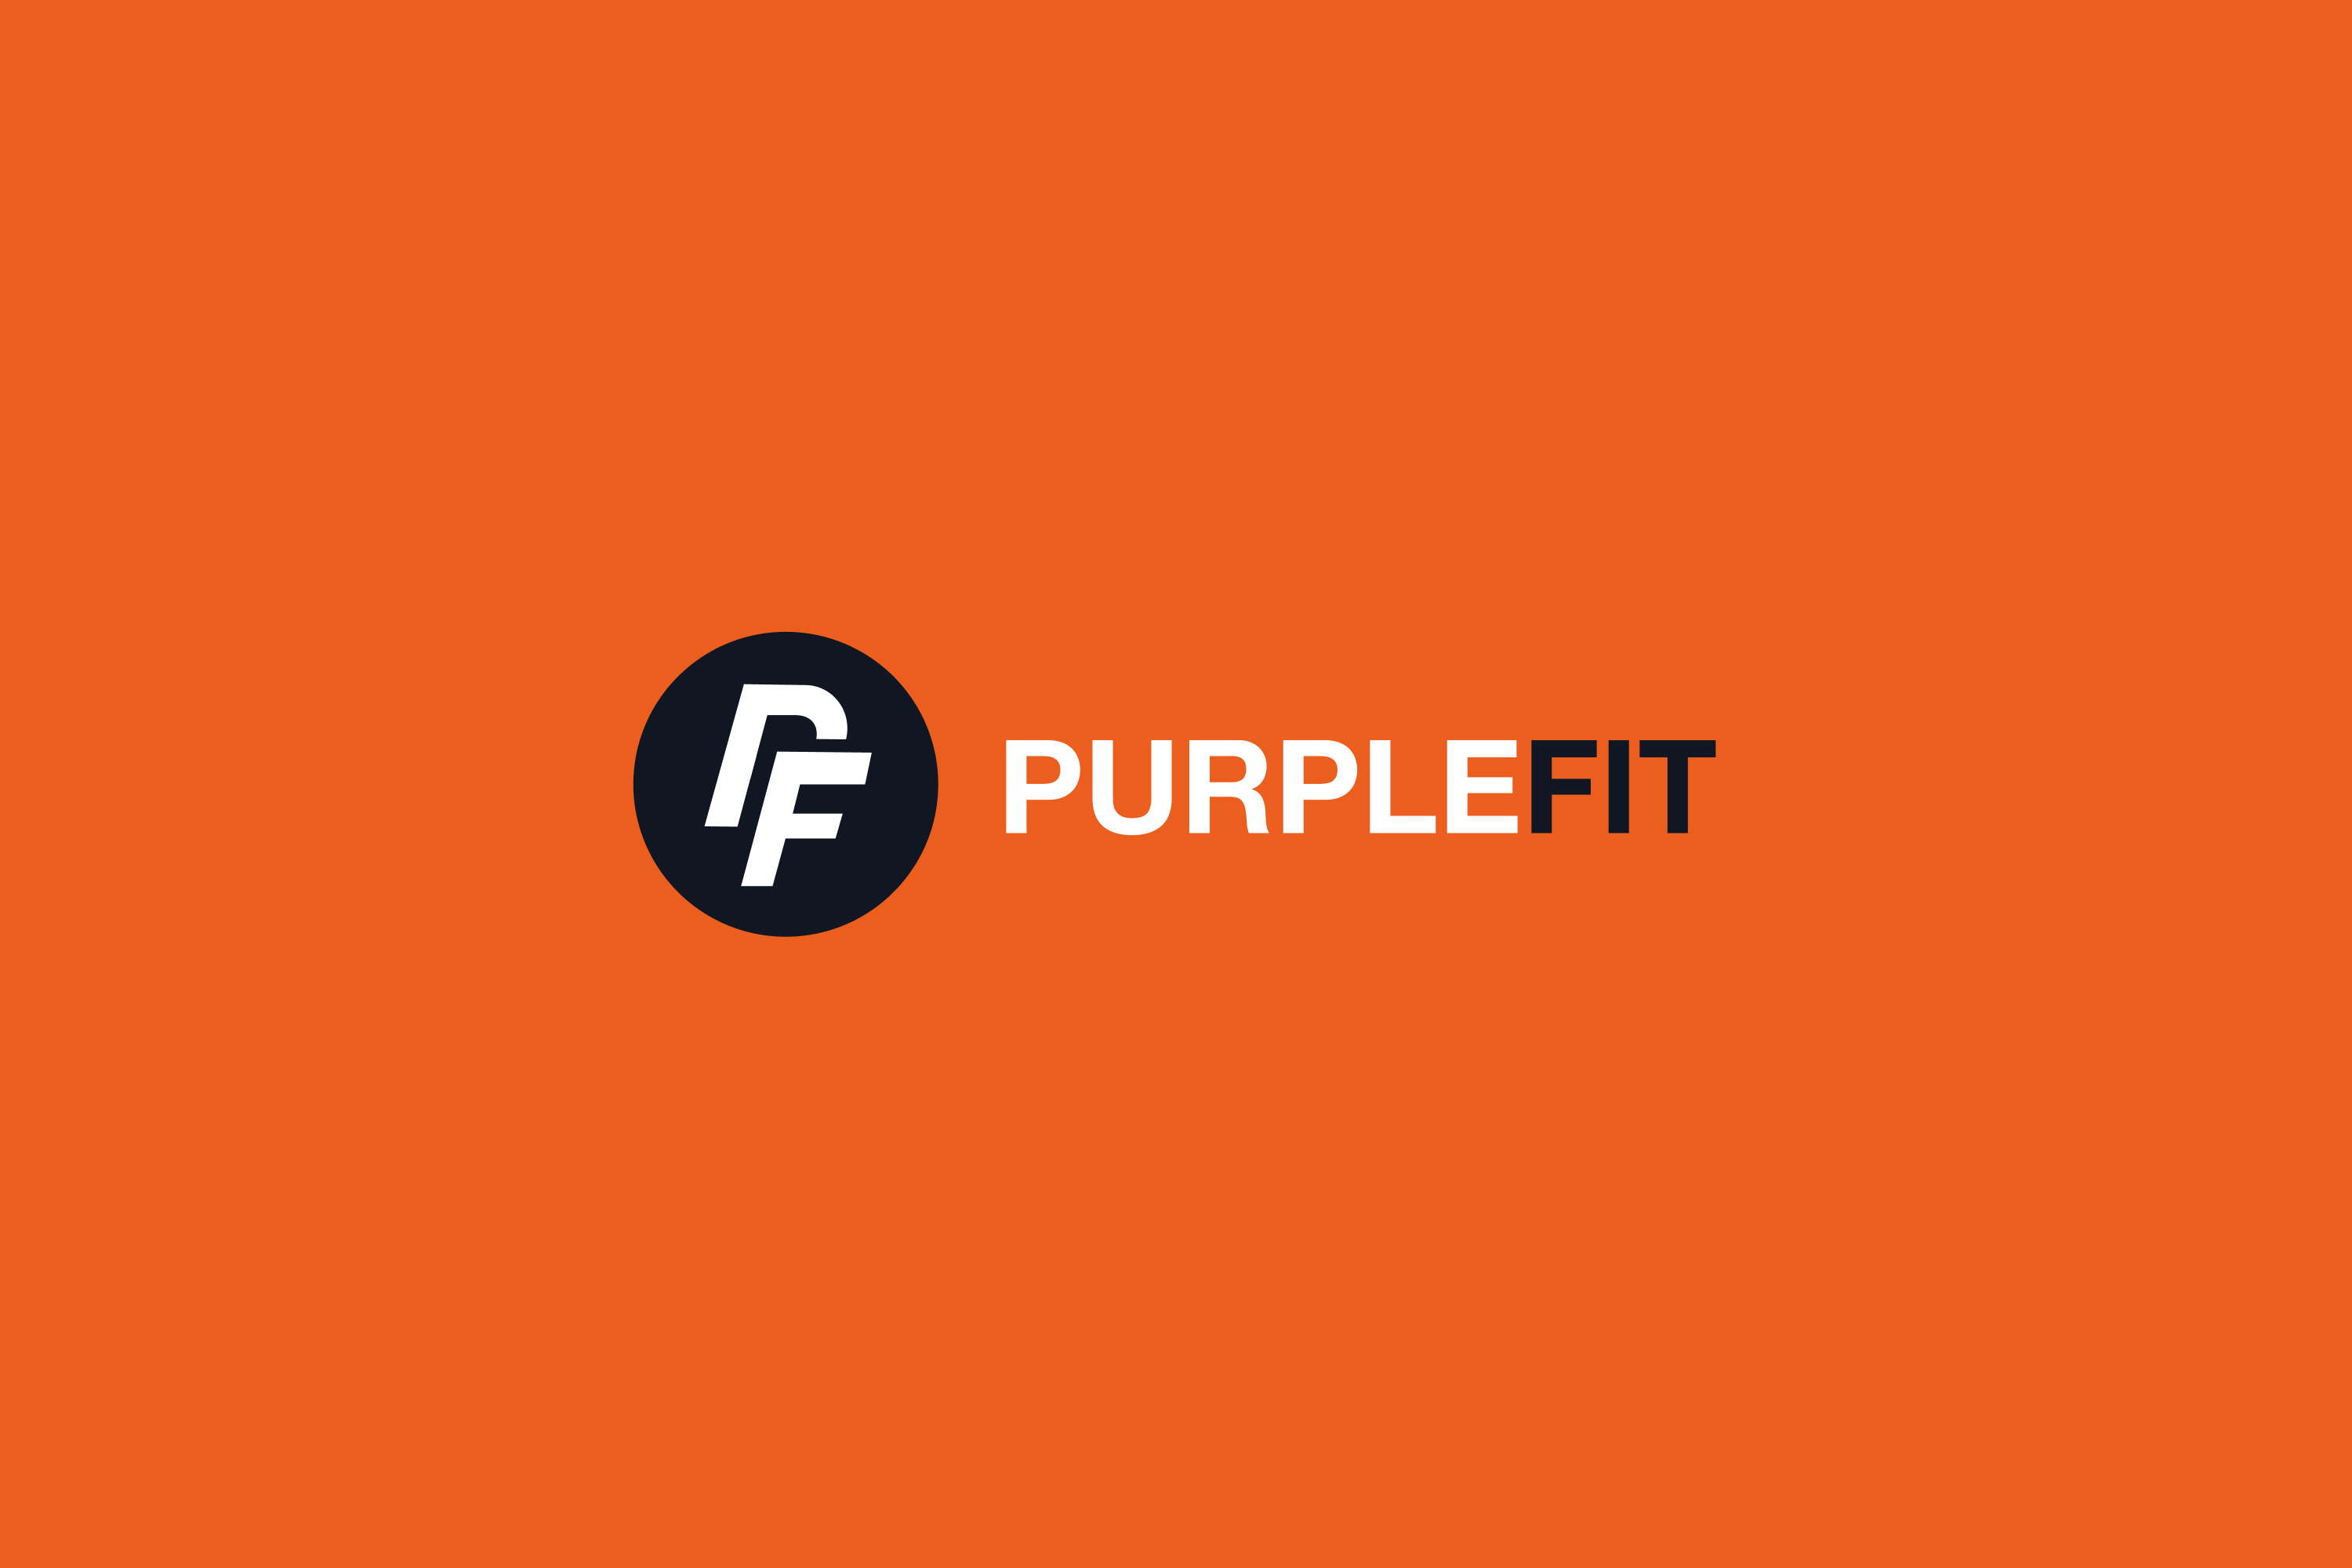 Our products - PurpleSoft